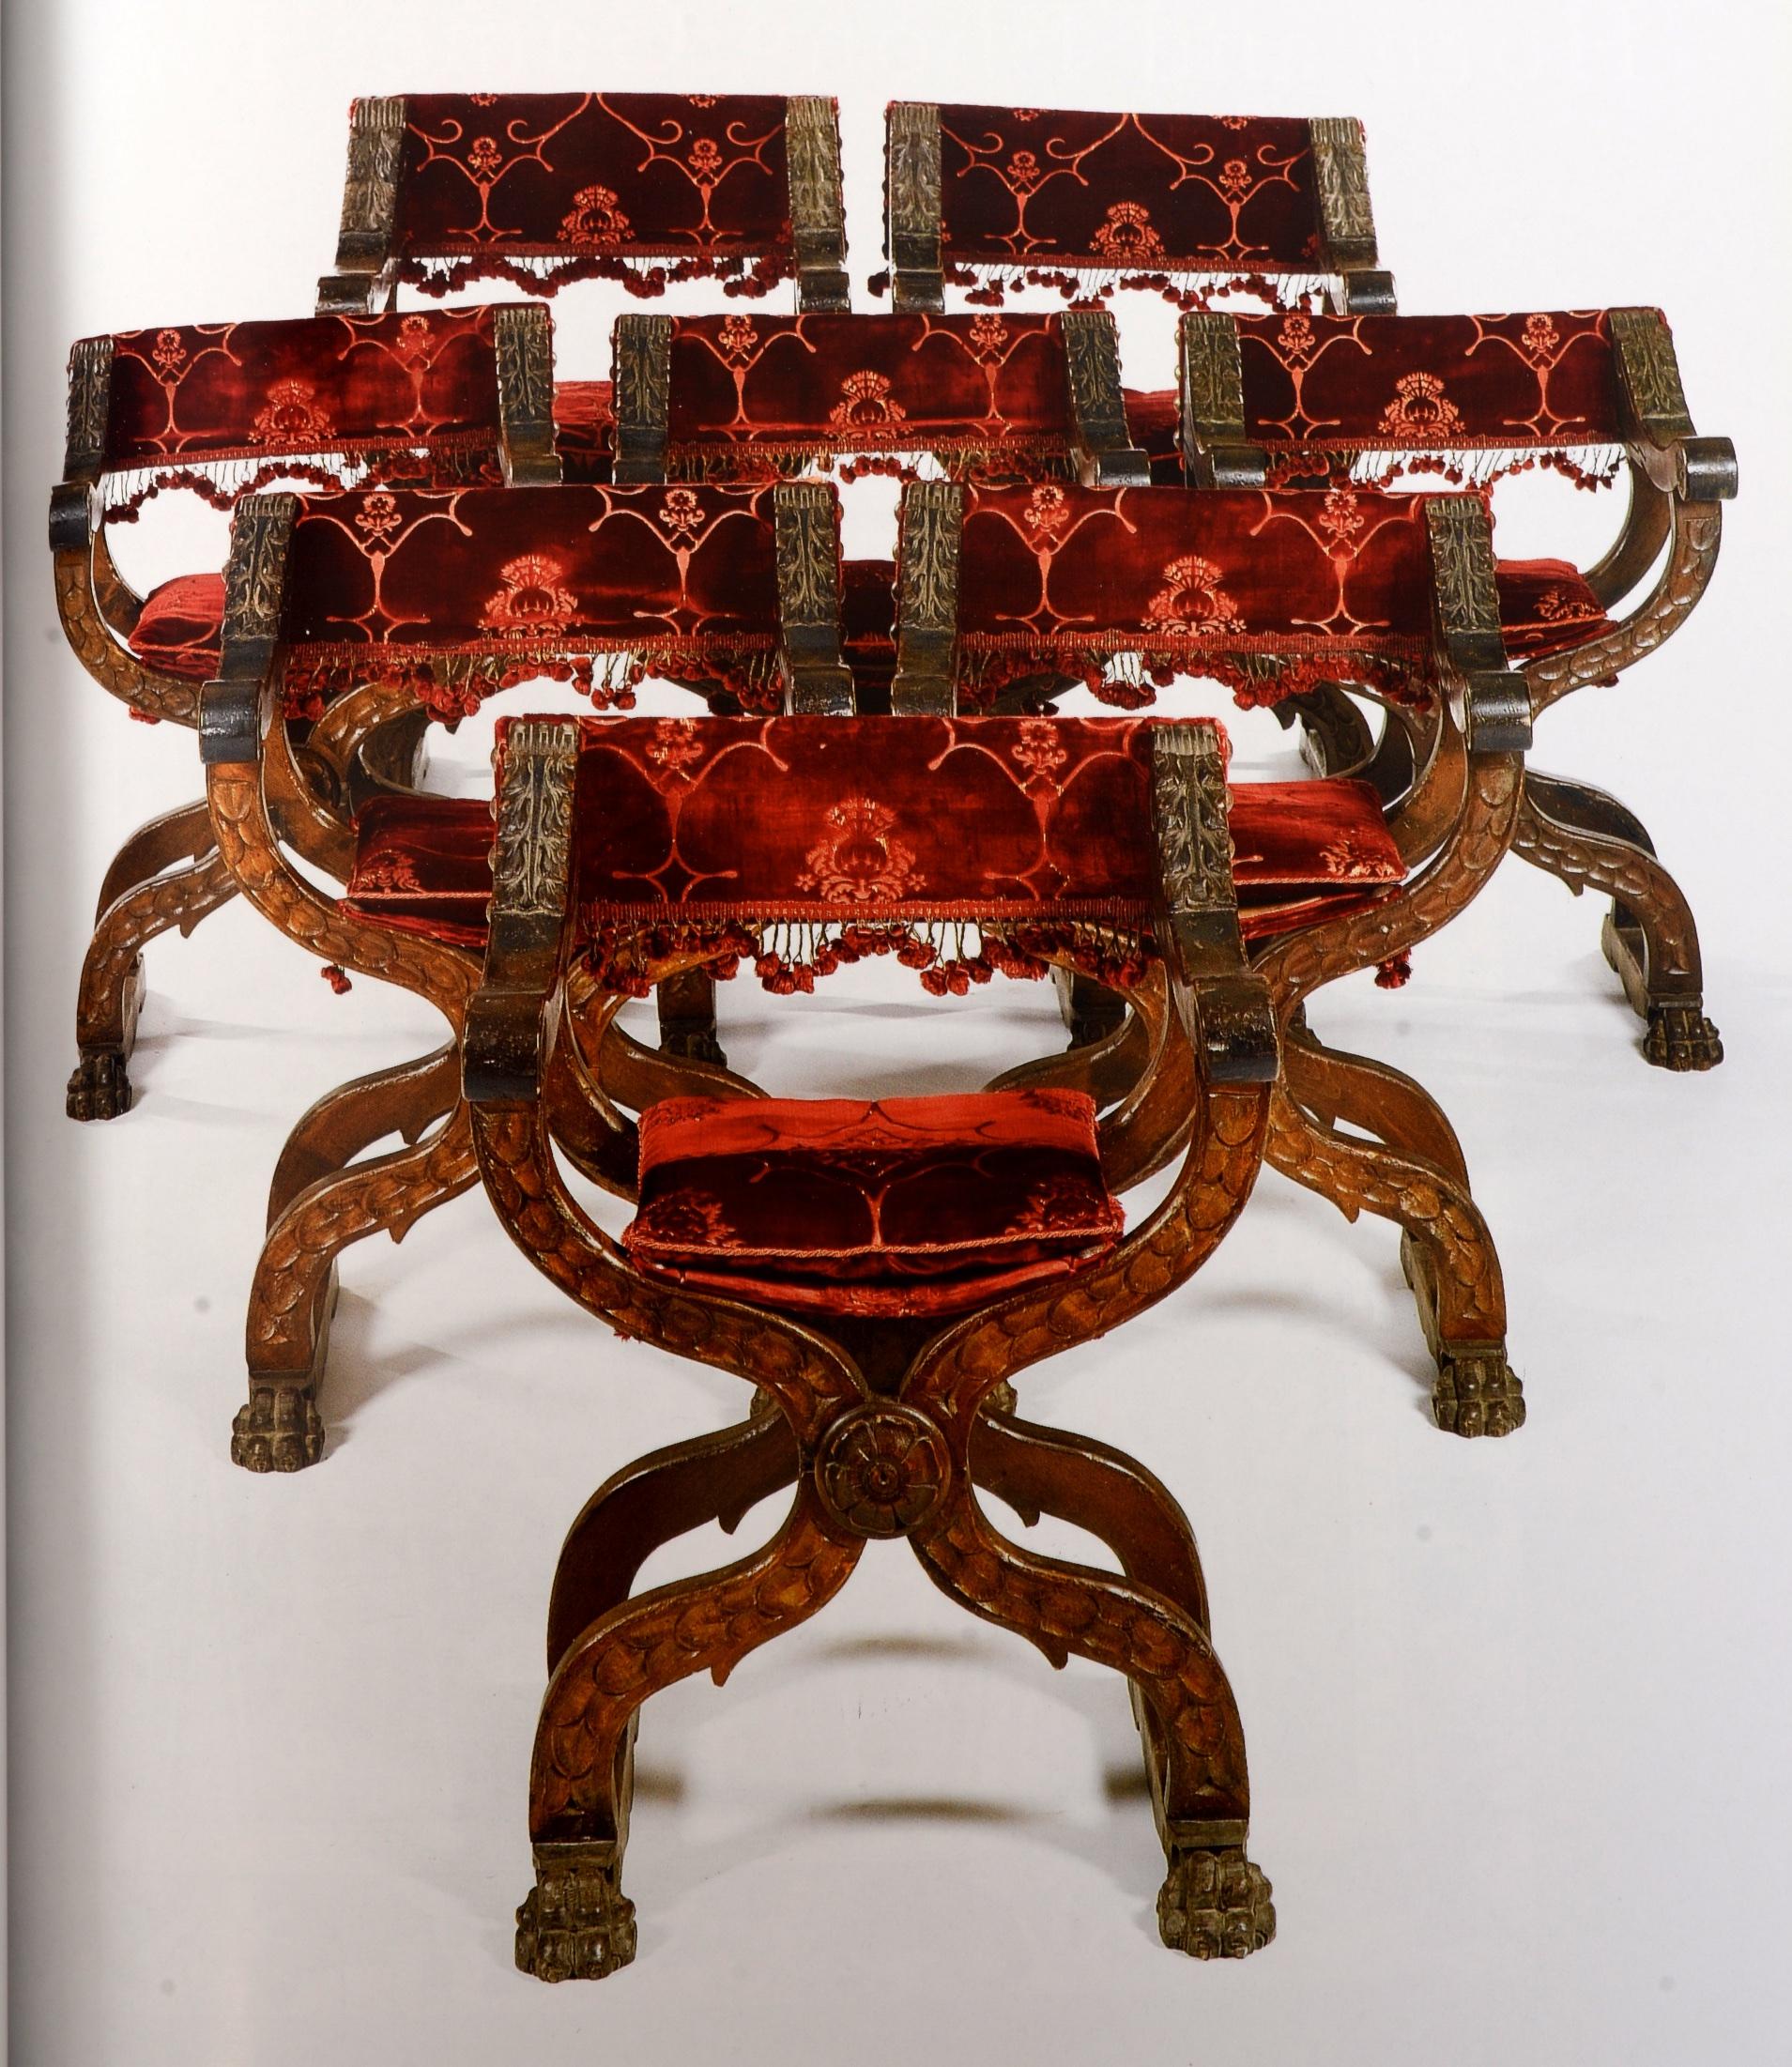 Sotheby's Haute Epoque-Important Early Furniture, Works of Art First Edition For Sale 8